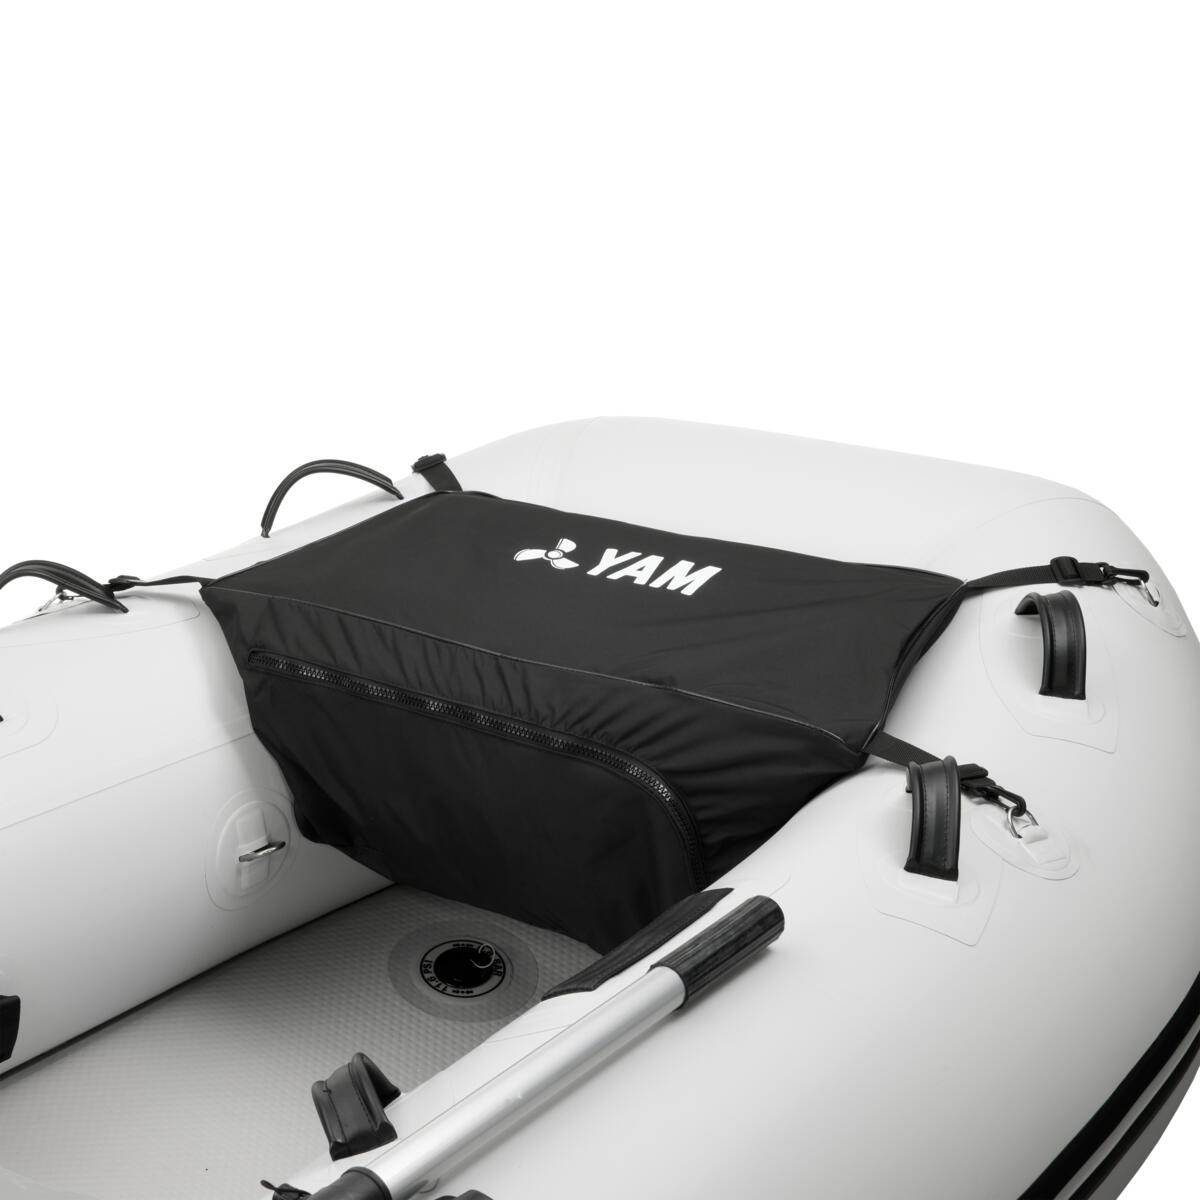 Add storage to your boat with this easy to install bow cover.